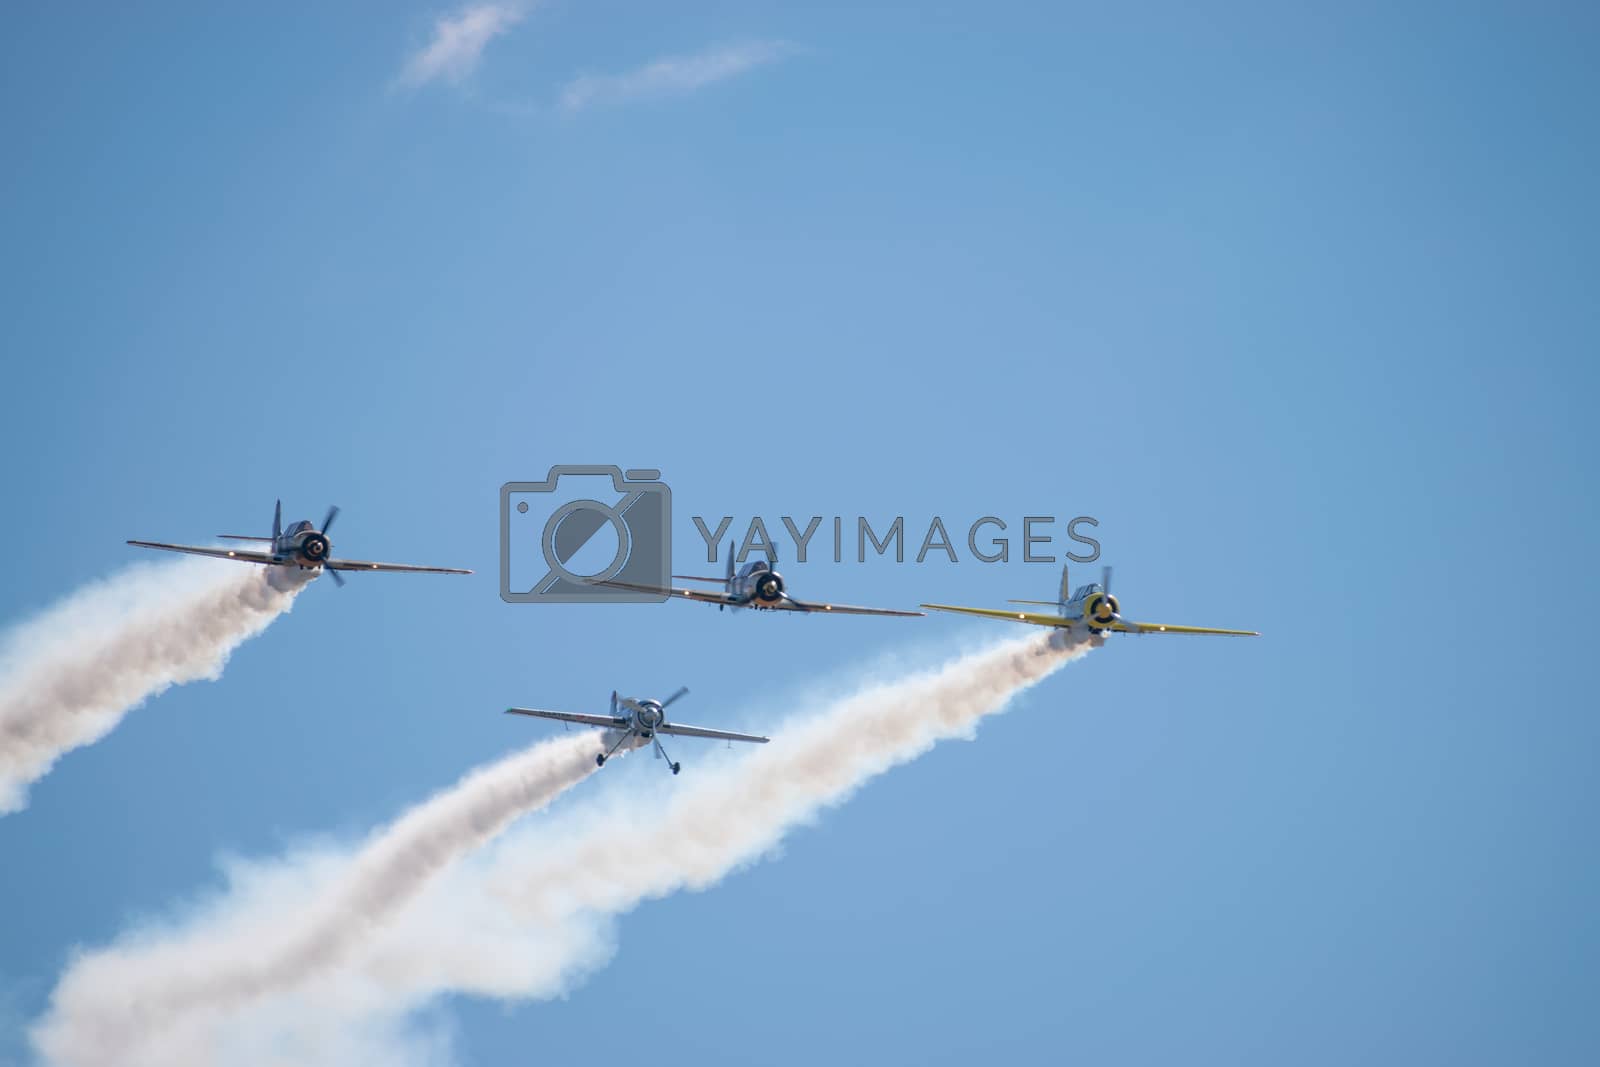 Royalty free image of Bucharest/ Romania - AeroNautic Show - September 21, 2019: Three YAK-52TW and Jurgis Kairys' Sukhoi Su-31 performing stunts together by Luca-Mih